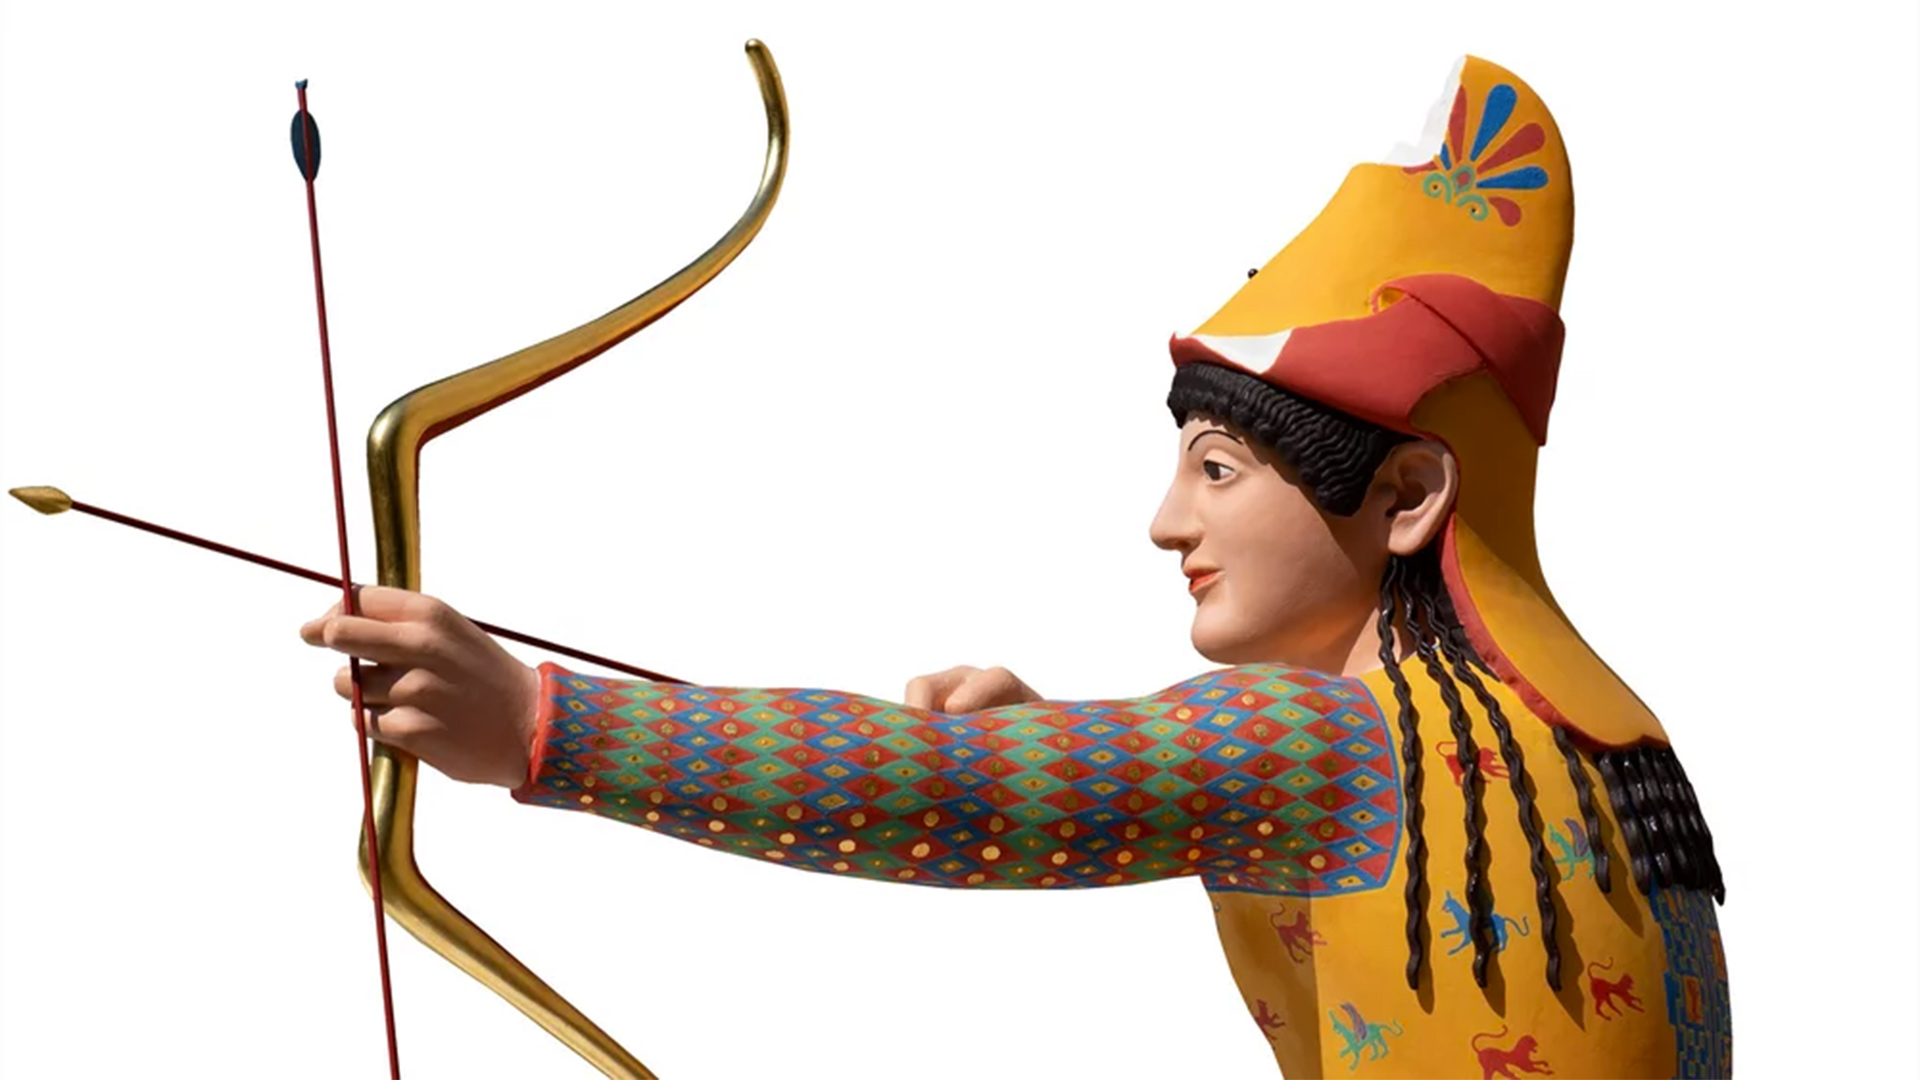 This reconstruction of a marble archer shows the vivid colors that characterized Greek sculpture, and patterns that identify him as a fighter from Persia.